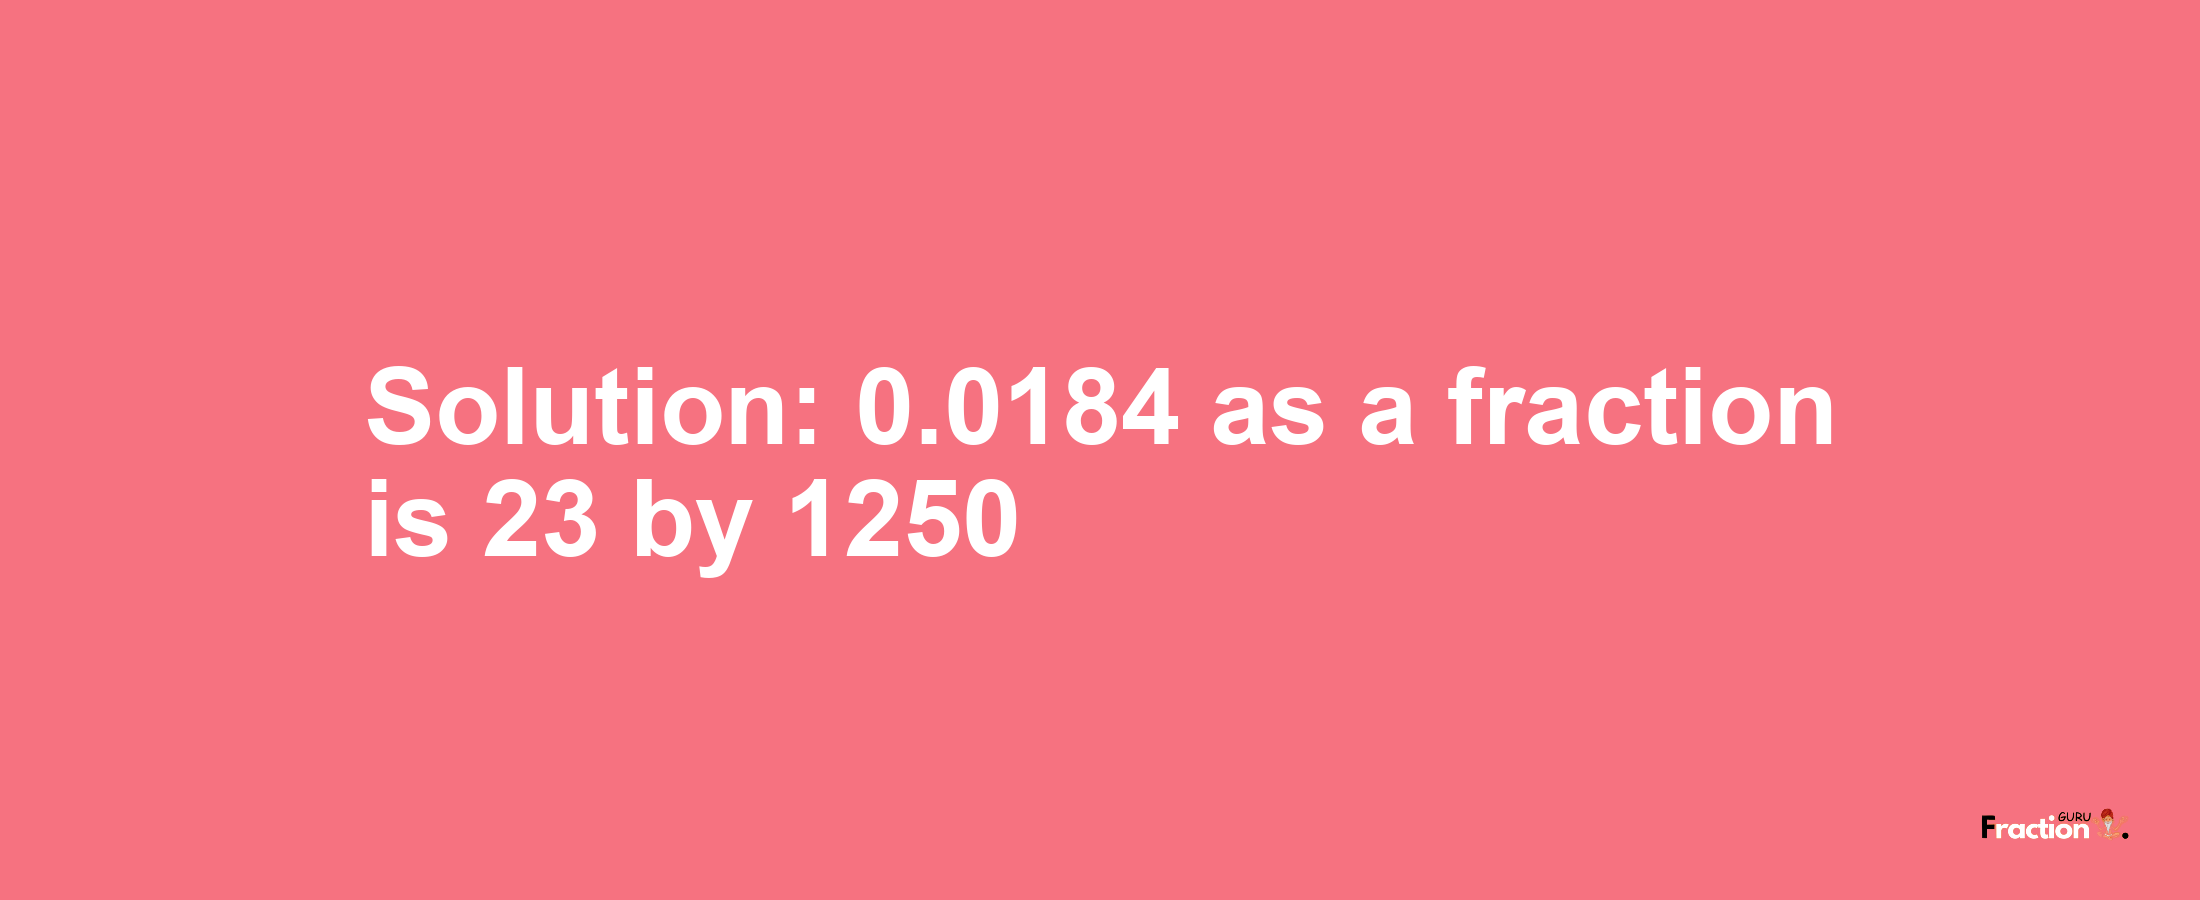 Solution:0.0184 as a fraction is 23/1250